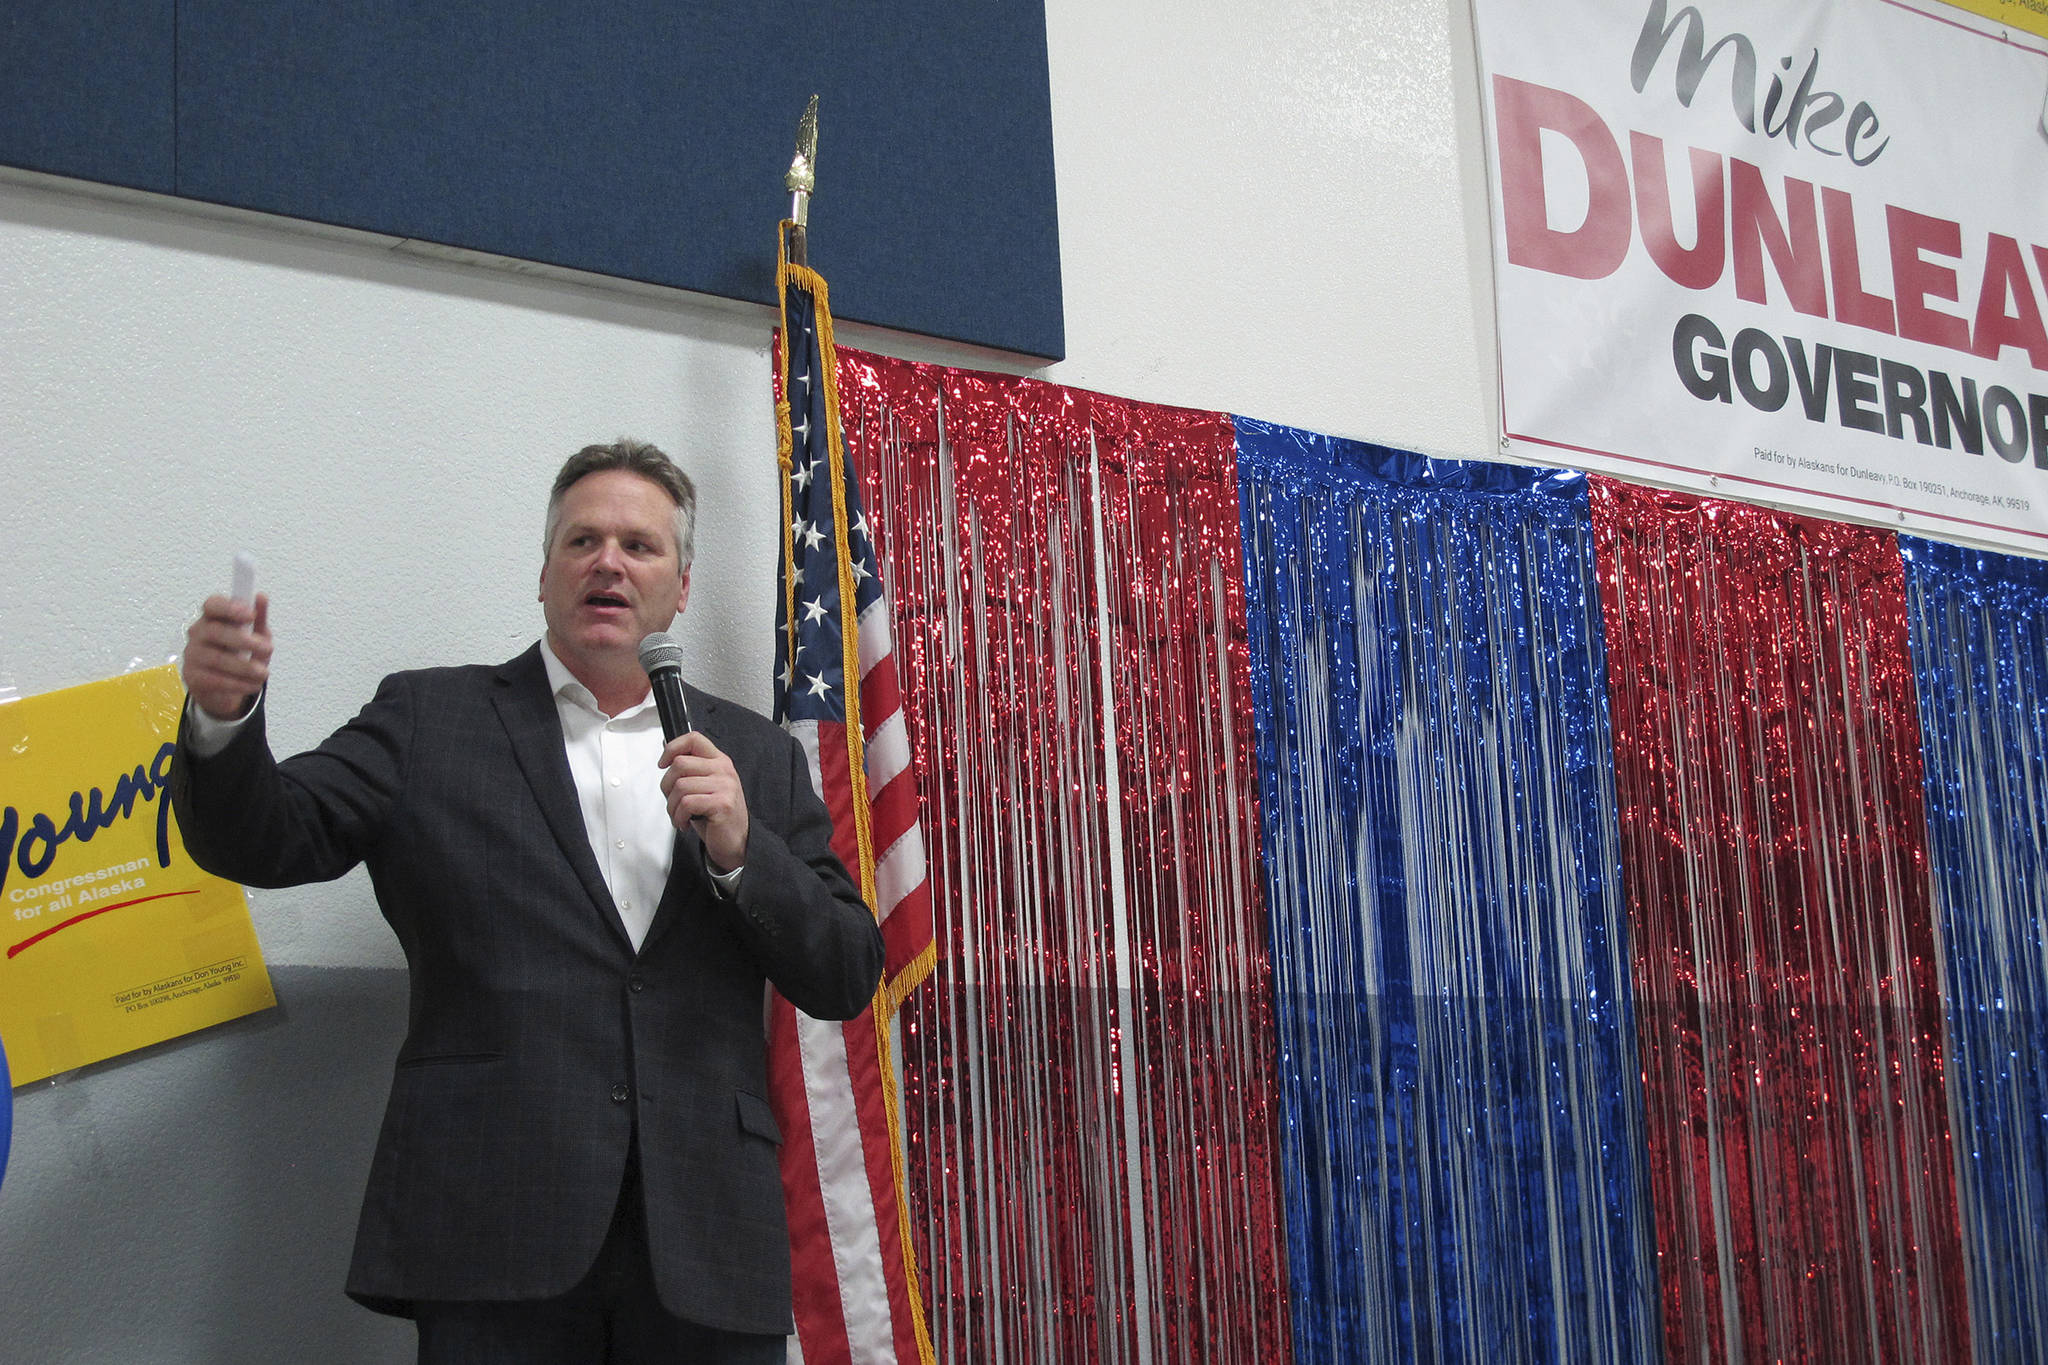 In this photo taken Sunday, Nov. 4, 2018, Alaska Republican gubernatorial candidate Mike Dunleavy gestures while on stage during a GOP rally in Anchorage, Alaska. Dunleavy and Democrat Mark Begich are the two major candidates vying to replace Gov. Bill Walker, who ended his campaign in October. (AP Photo/Becky Bohrer)